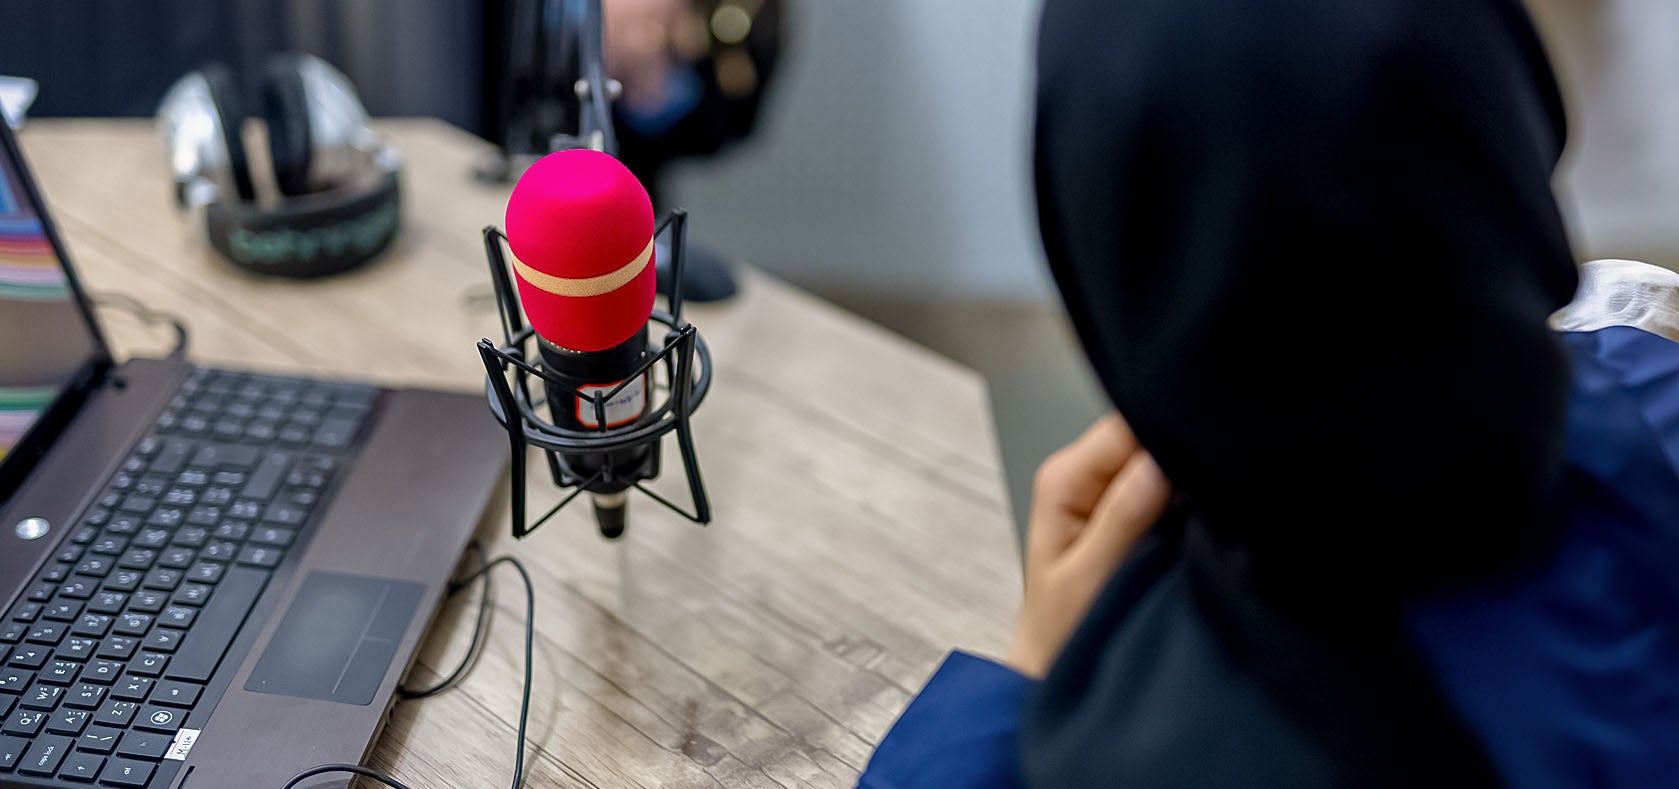 A Muslim woman in a black burqa is seen from her backside sitting while talking over a red microphone that is connected to a laptop PC.